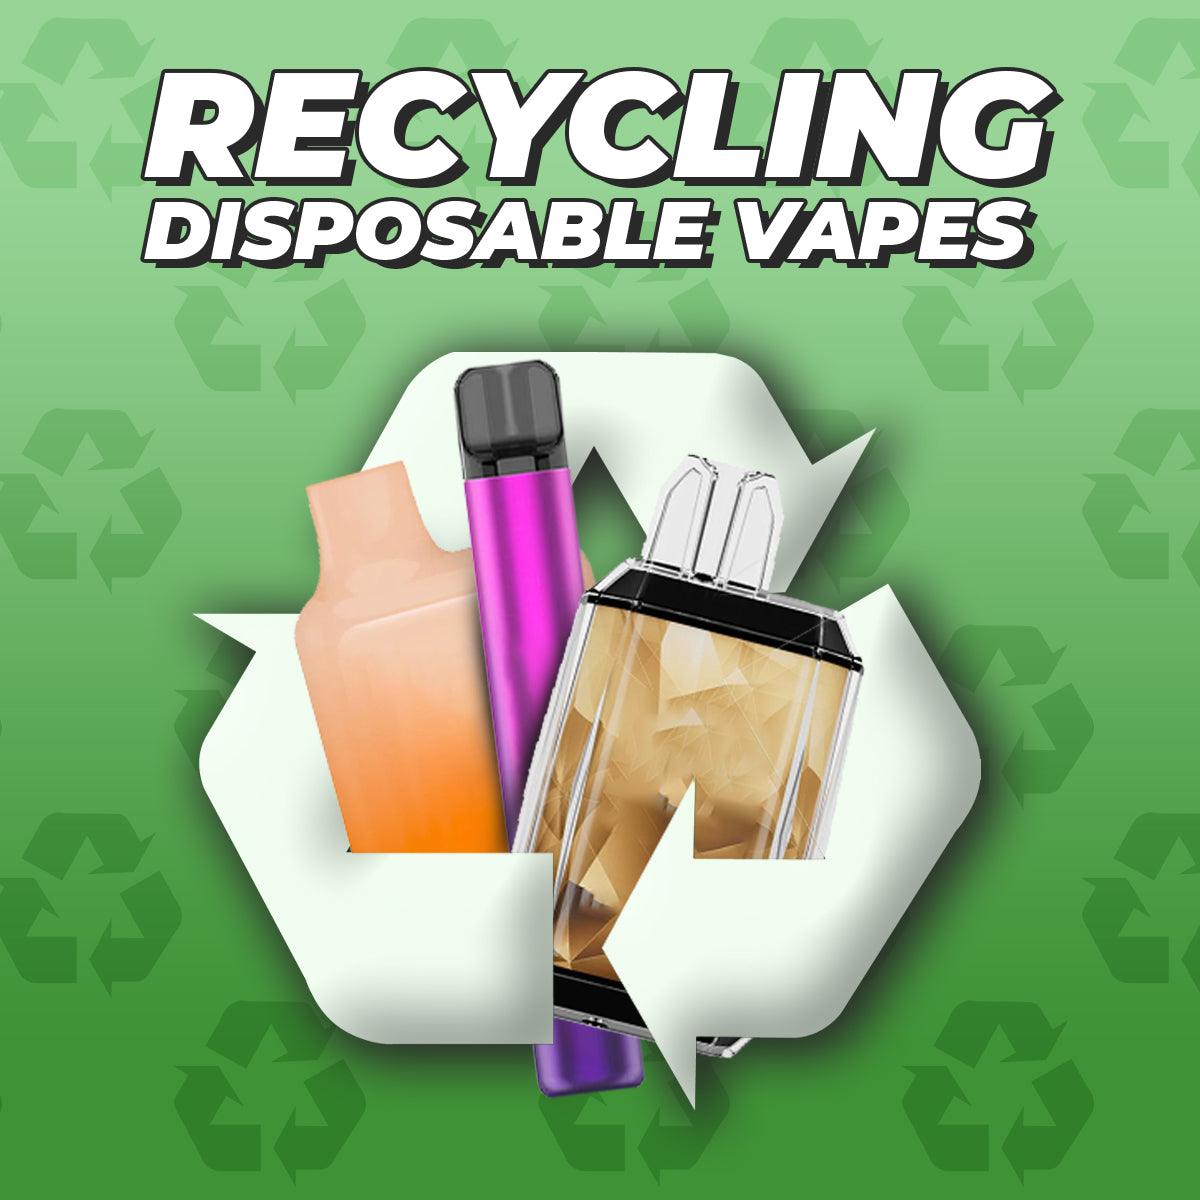 How To Dispose & Recycle Disposable Vape Pens